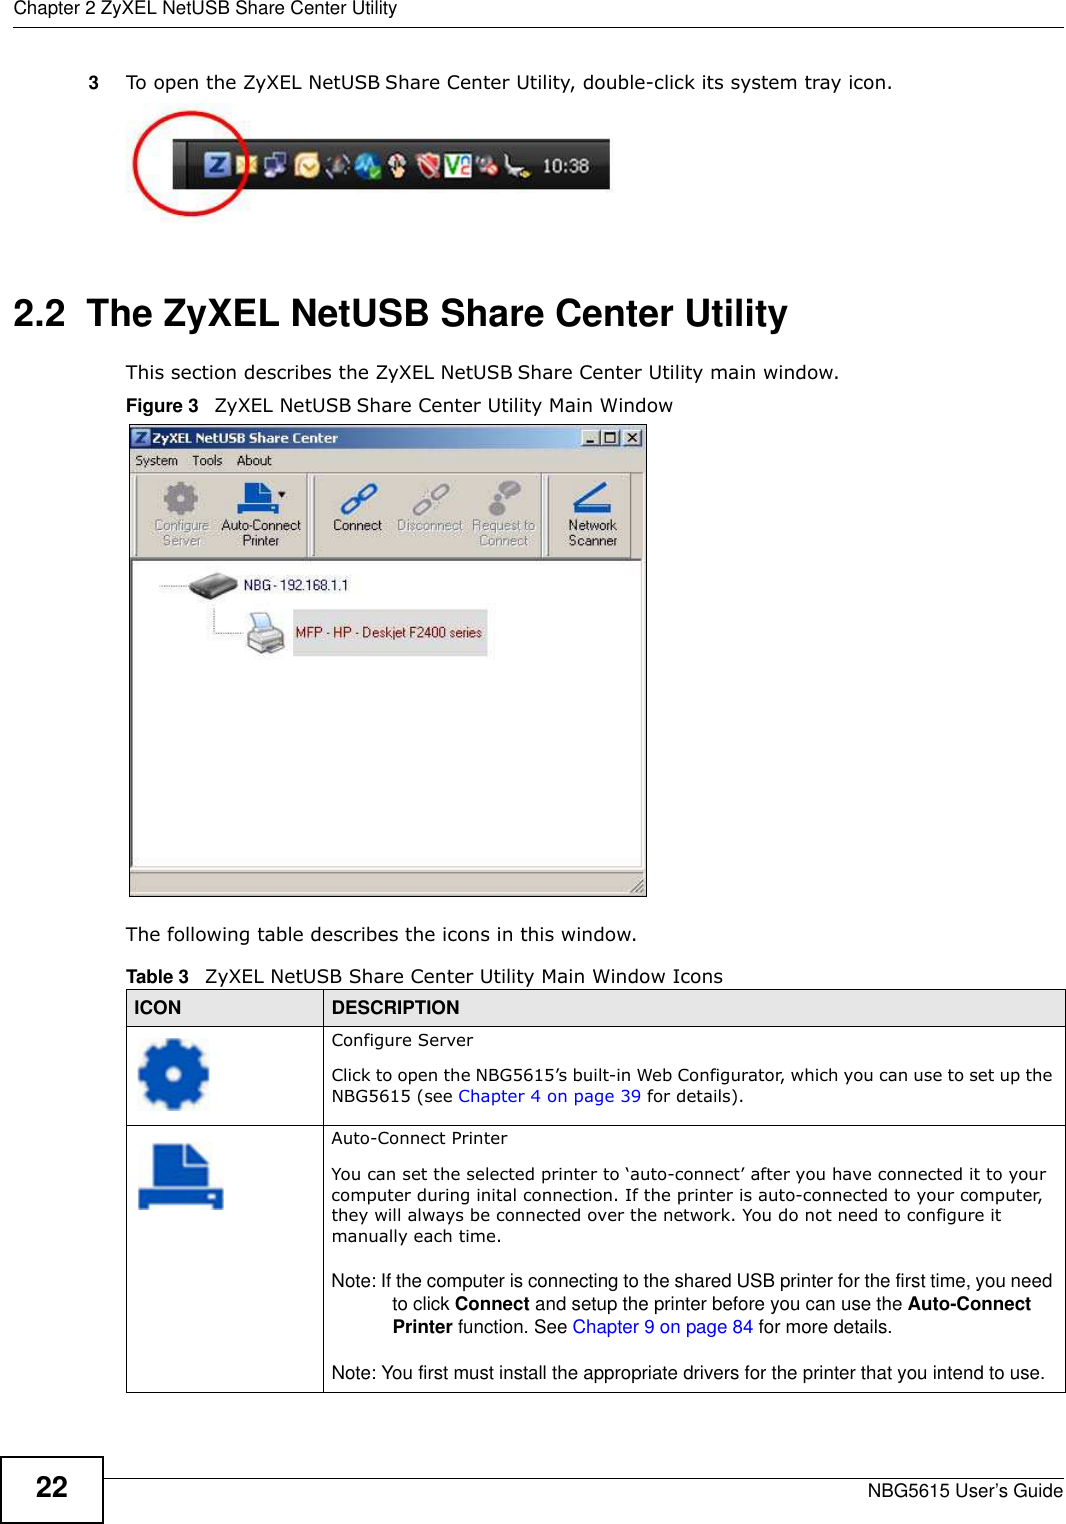 Chapter 2 ZyXEL NetUSB Share Center UtilityNBG5615 User’s Guide223To open the ZyXEL NetUSB Share Center Utility, double-click its system tray icon.2.2  The ZyXEL NetUSB Share Center UtilityThis section describes the ZyXEL NetUSB Share Center Utility main window.Figure 3   ZyXEL NetUSB Share Center Utility Main WindowThe following table describes the icons in this window.Table 3   ZyXEL NetUSB Share Center Utility Main Window IconsICON DESCRIPTIONConfigure ServerClick to open the NBG5615’s built-in Web Configurator, which you can use to set up the NBG5615 (see Chapter 4 on page 39 for details).Auto-Connect PrinterYou can set the selected printer to ‘auto-connect’ after you have connected it to your computer during inital connection. If the printer is auto-connected to your computer, they will always be connected over the network. You do not need to configure it manually each time.Note: If the computer is connecting to the shared USB printer for the first time, you need to click Connect and setup the printer before you can use the Auto-Connect Printer function. See Chapter 9 on page 84 for more details. Note: You first must install the appropriate drivers for the printer that you intend to use.